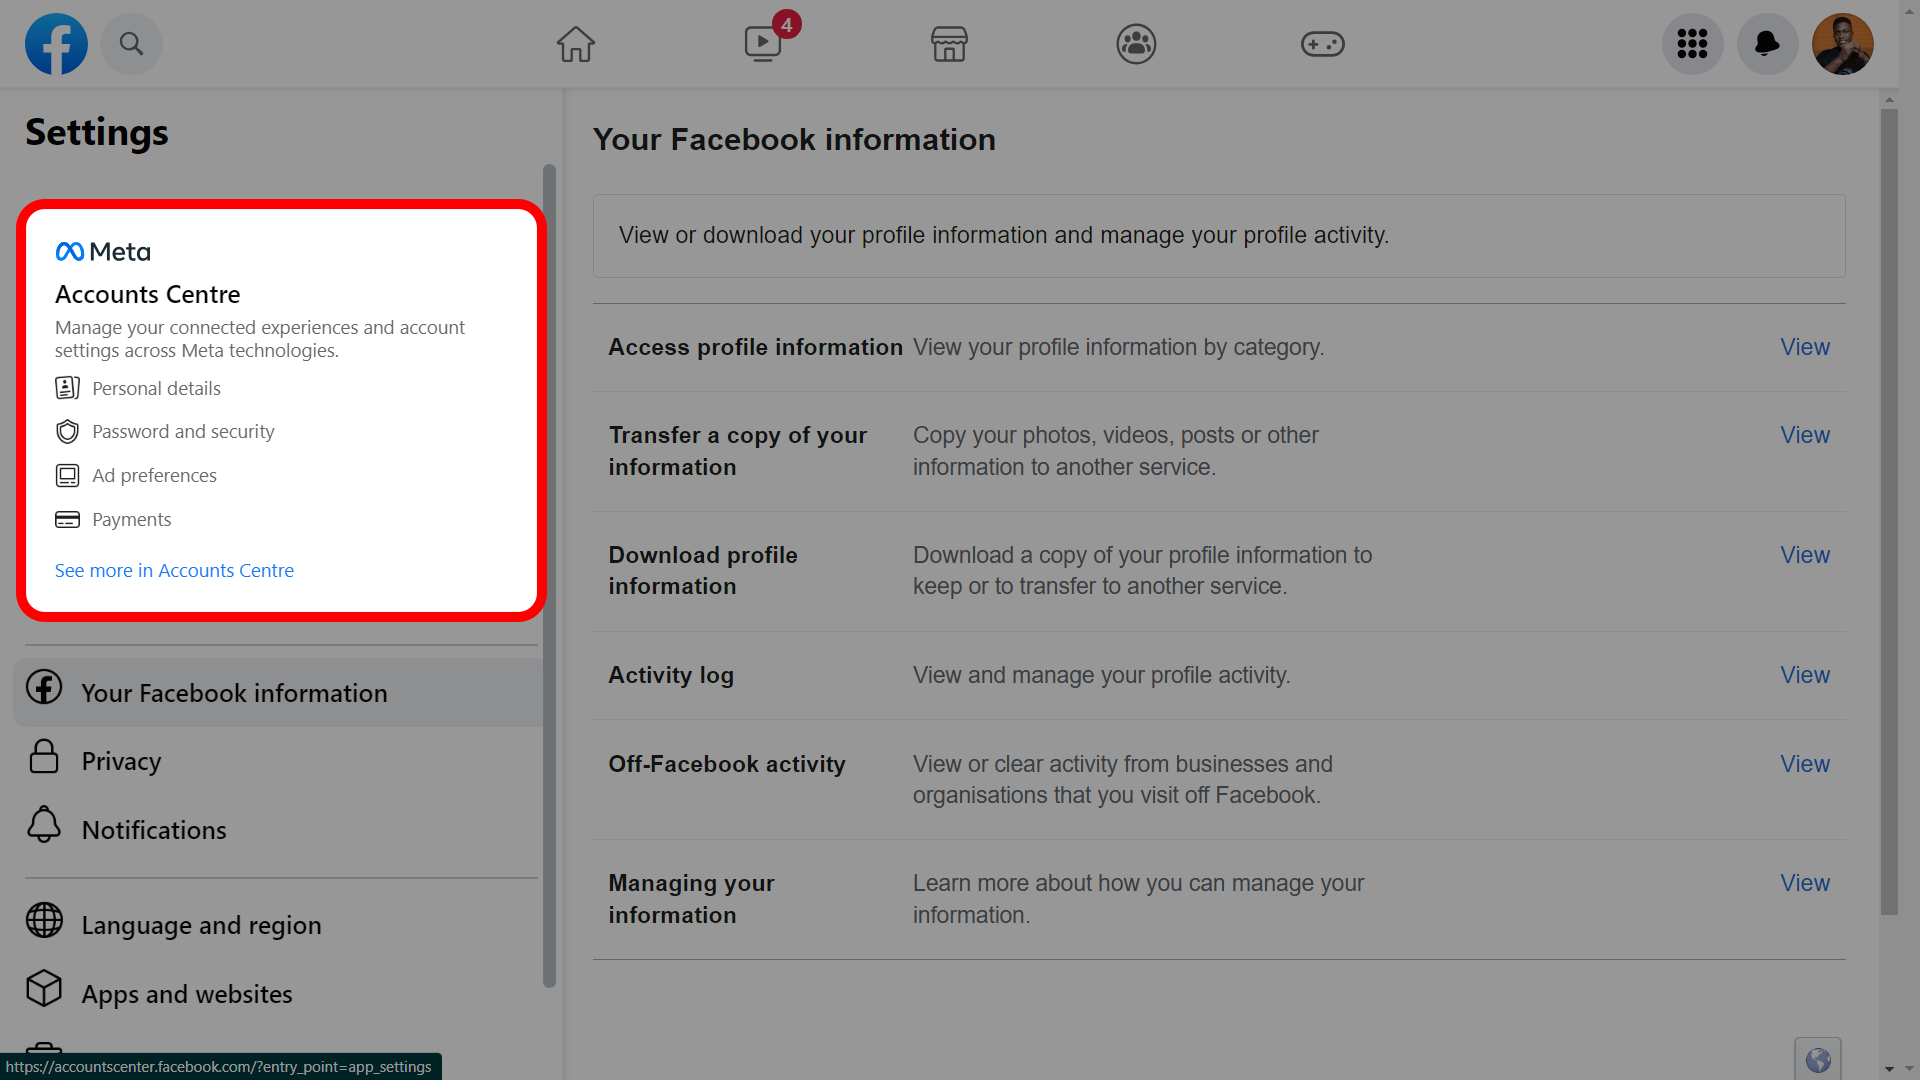 The Facebook Settings page highlighting the Meta Accounts Center